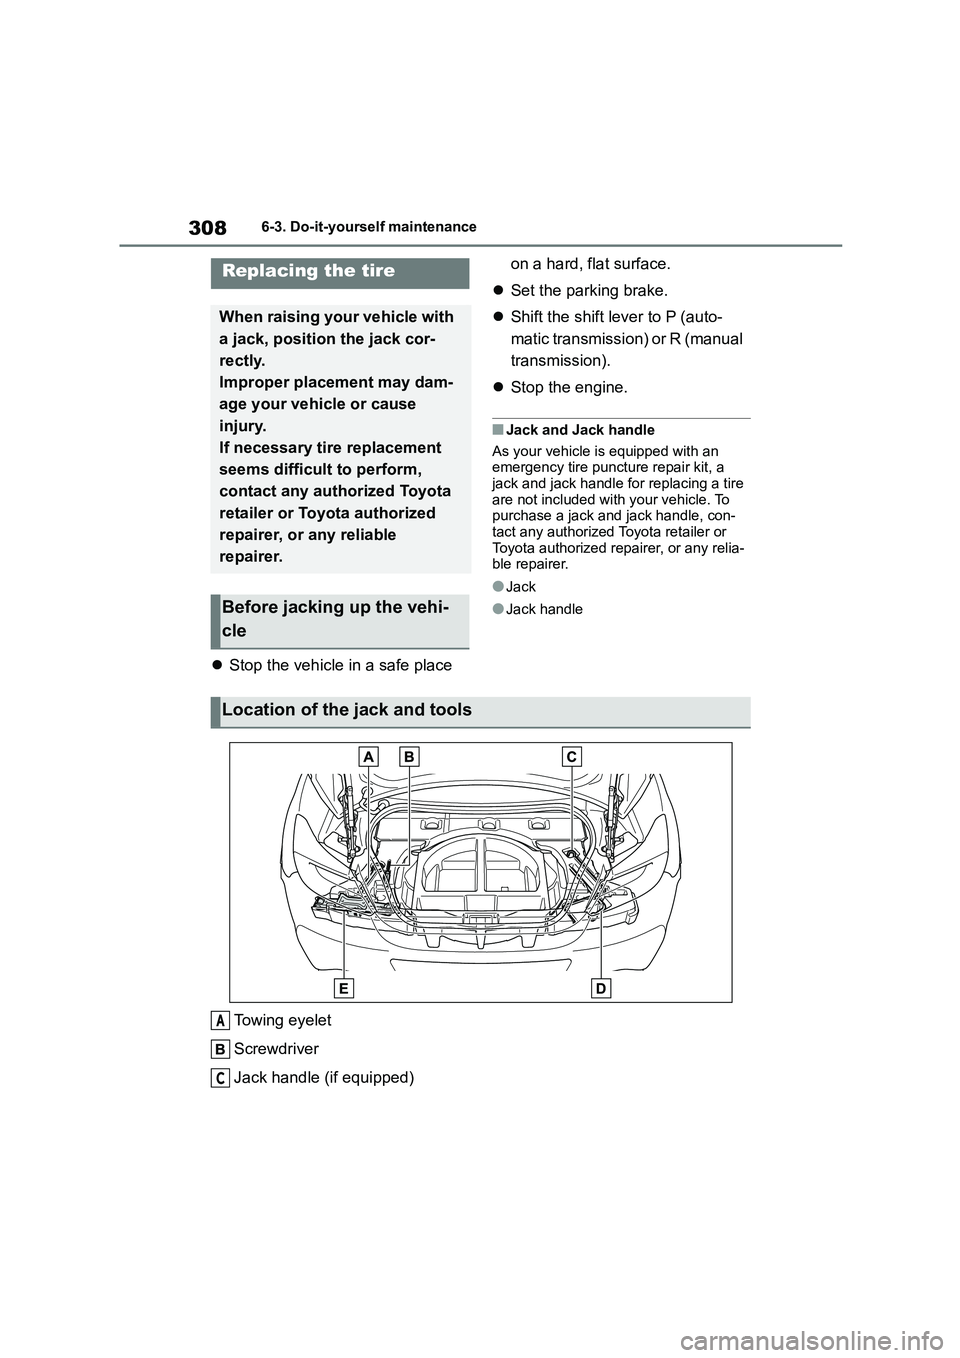 TOYOTA GR86 2022   (in English) User Guide 3086-3. Do-it-yourself maintenance
Stop the vehicle in a safe place  
on a hard, flat surface. 
 Set the parking brake. 
 Shift the shift lever to P (auto- 
matic transmission) or R (manual 
